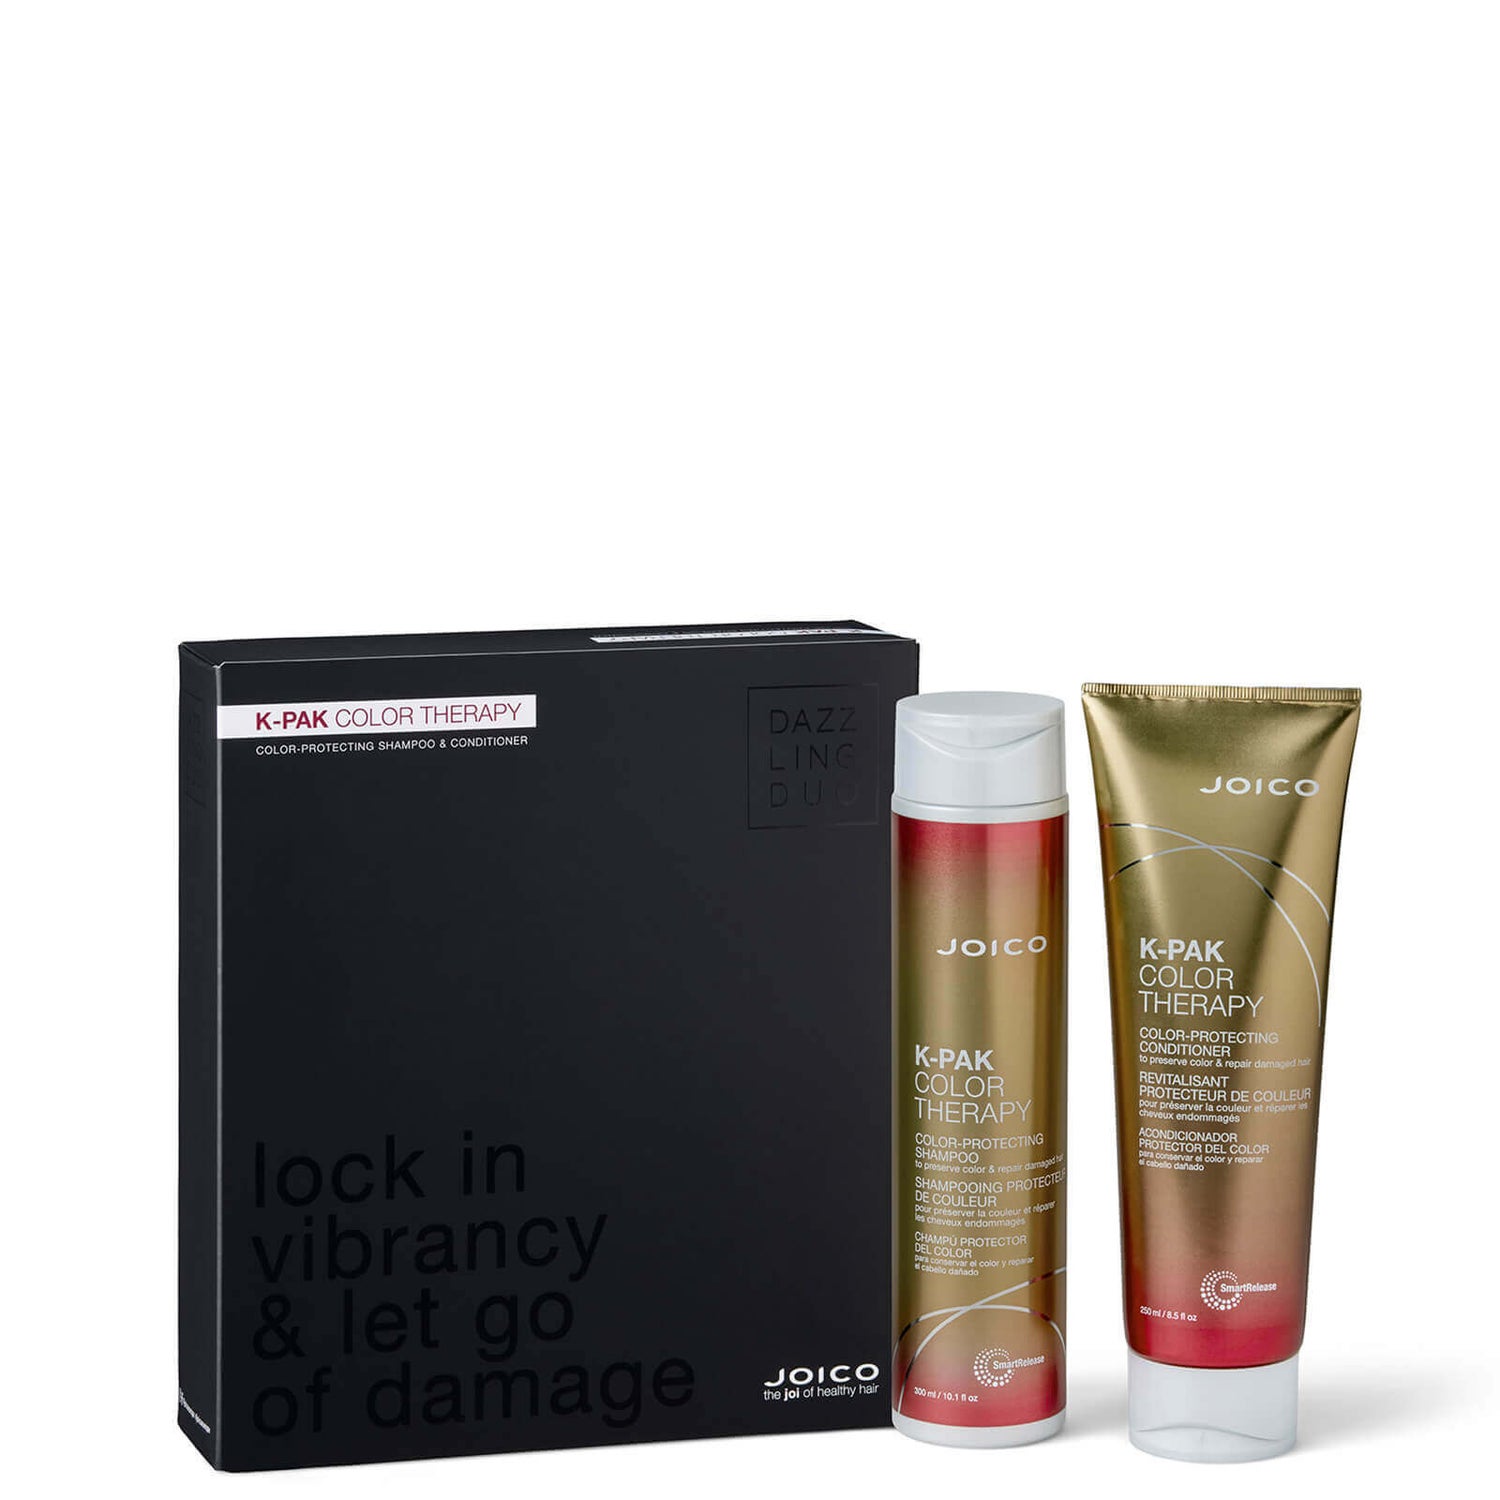 JOICO K-Pak Color Therapy Shampoo and Conditioner Dazzling Duo(조이코 케이팩 컬러 테라피 샴푸 앤 컨디셔너 대즐링 듀오)